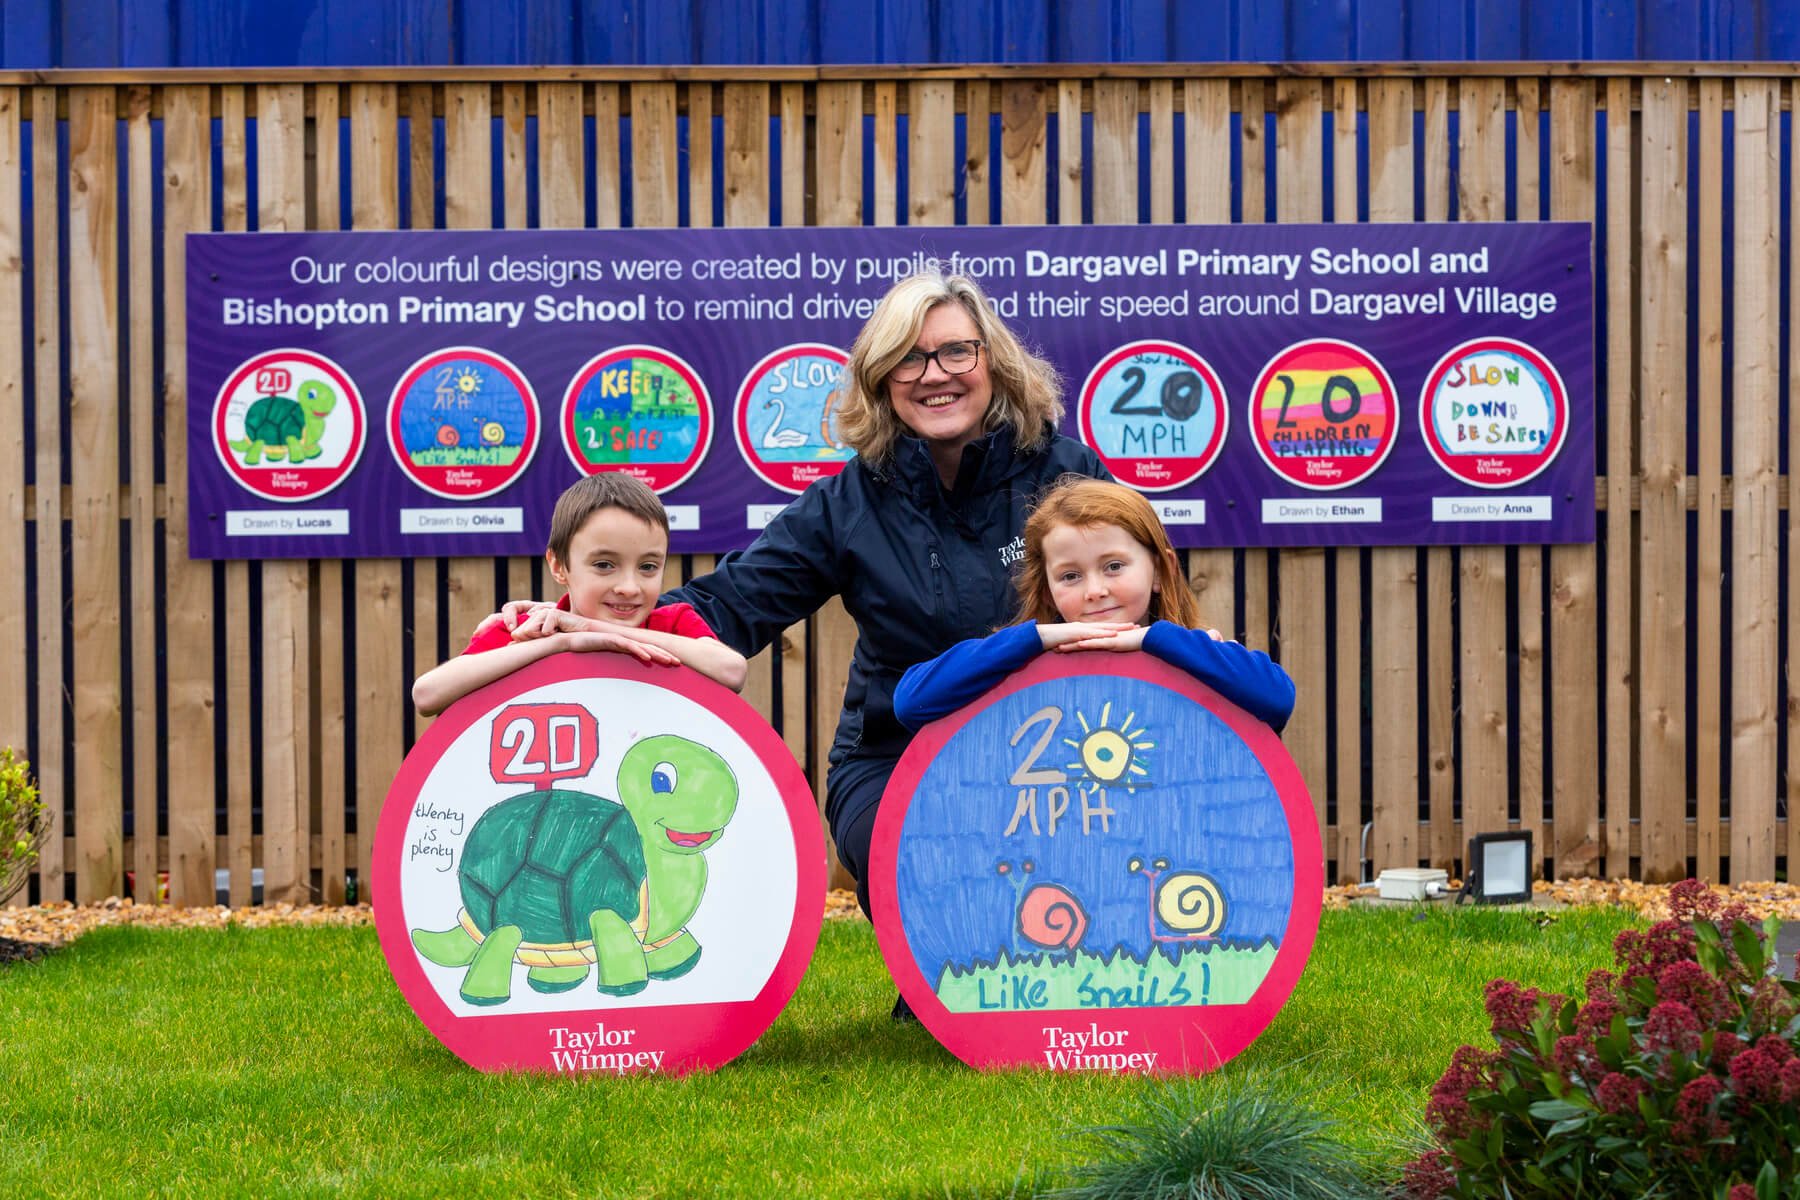 Taylor Wimpey Dargavel Village speed sign design competition